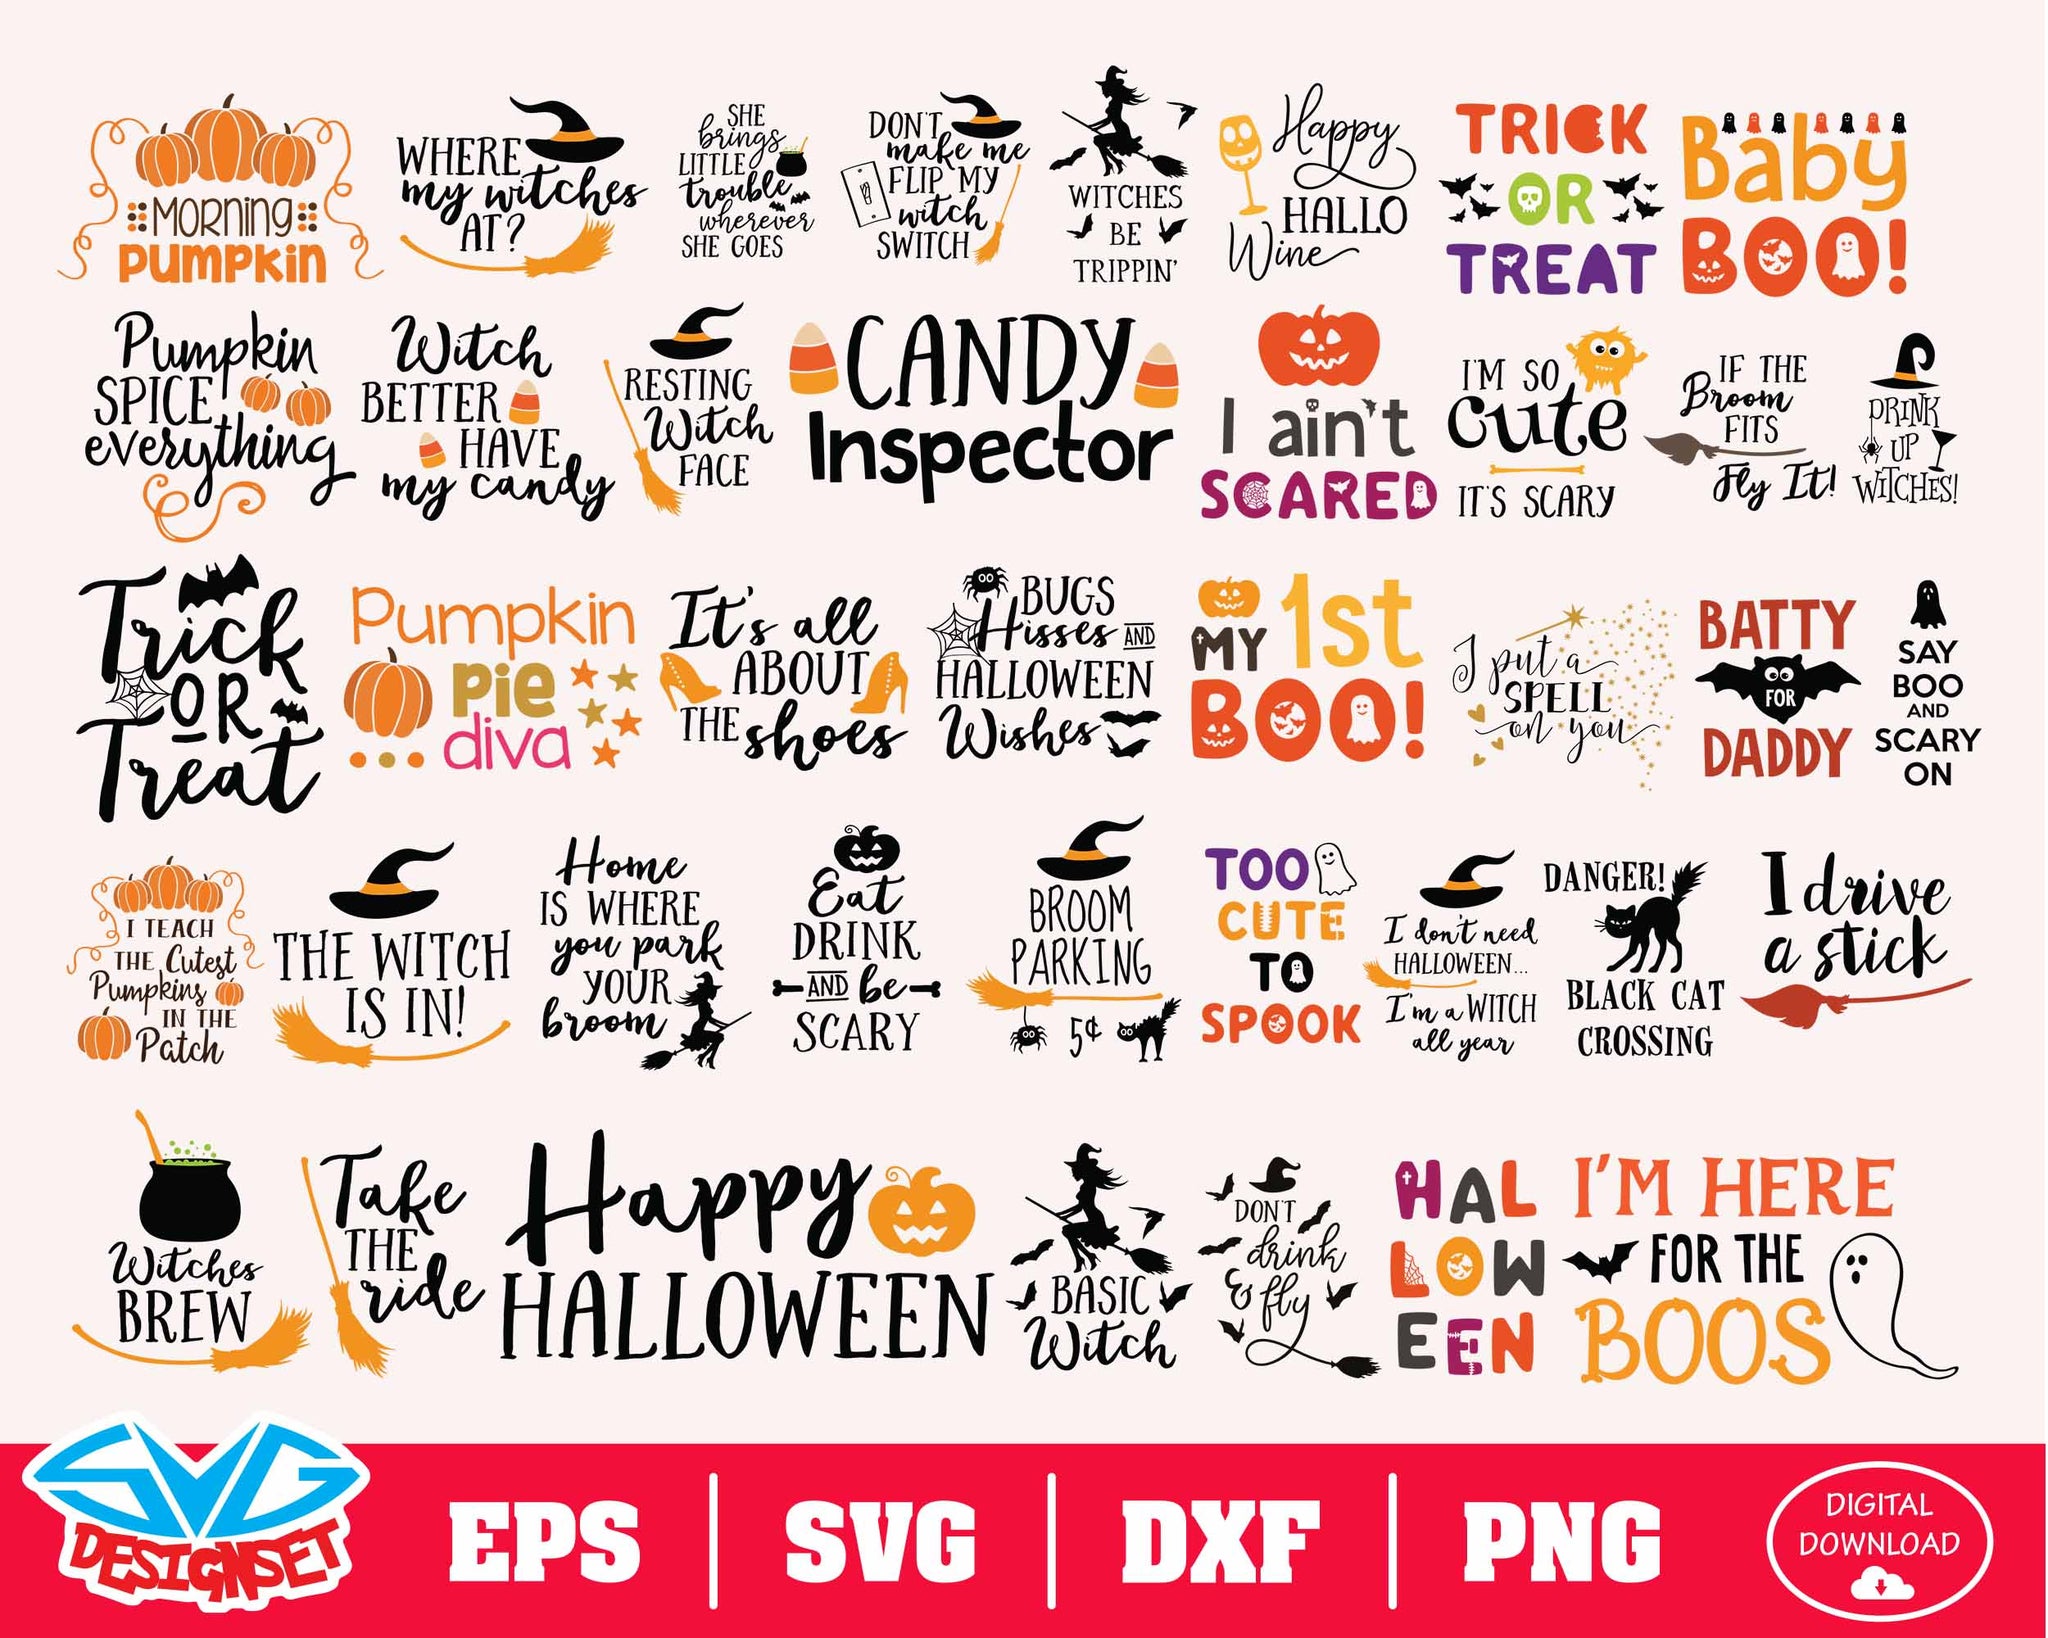 Halloween Bundle Svg, Dxf, Eps, Png, Clipart, Silhouette and Cutfiles #7 - SVGDesignSets